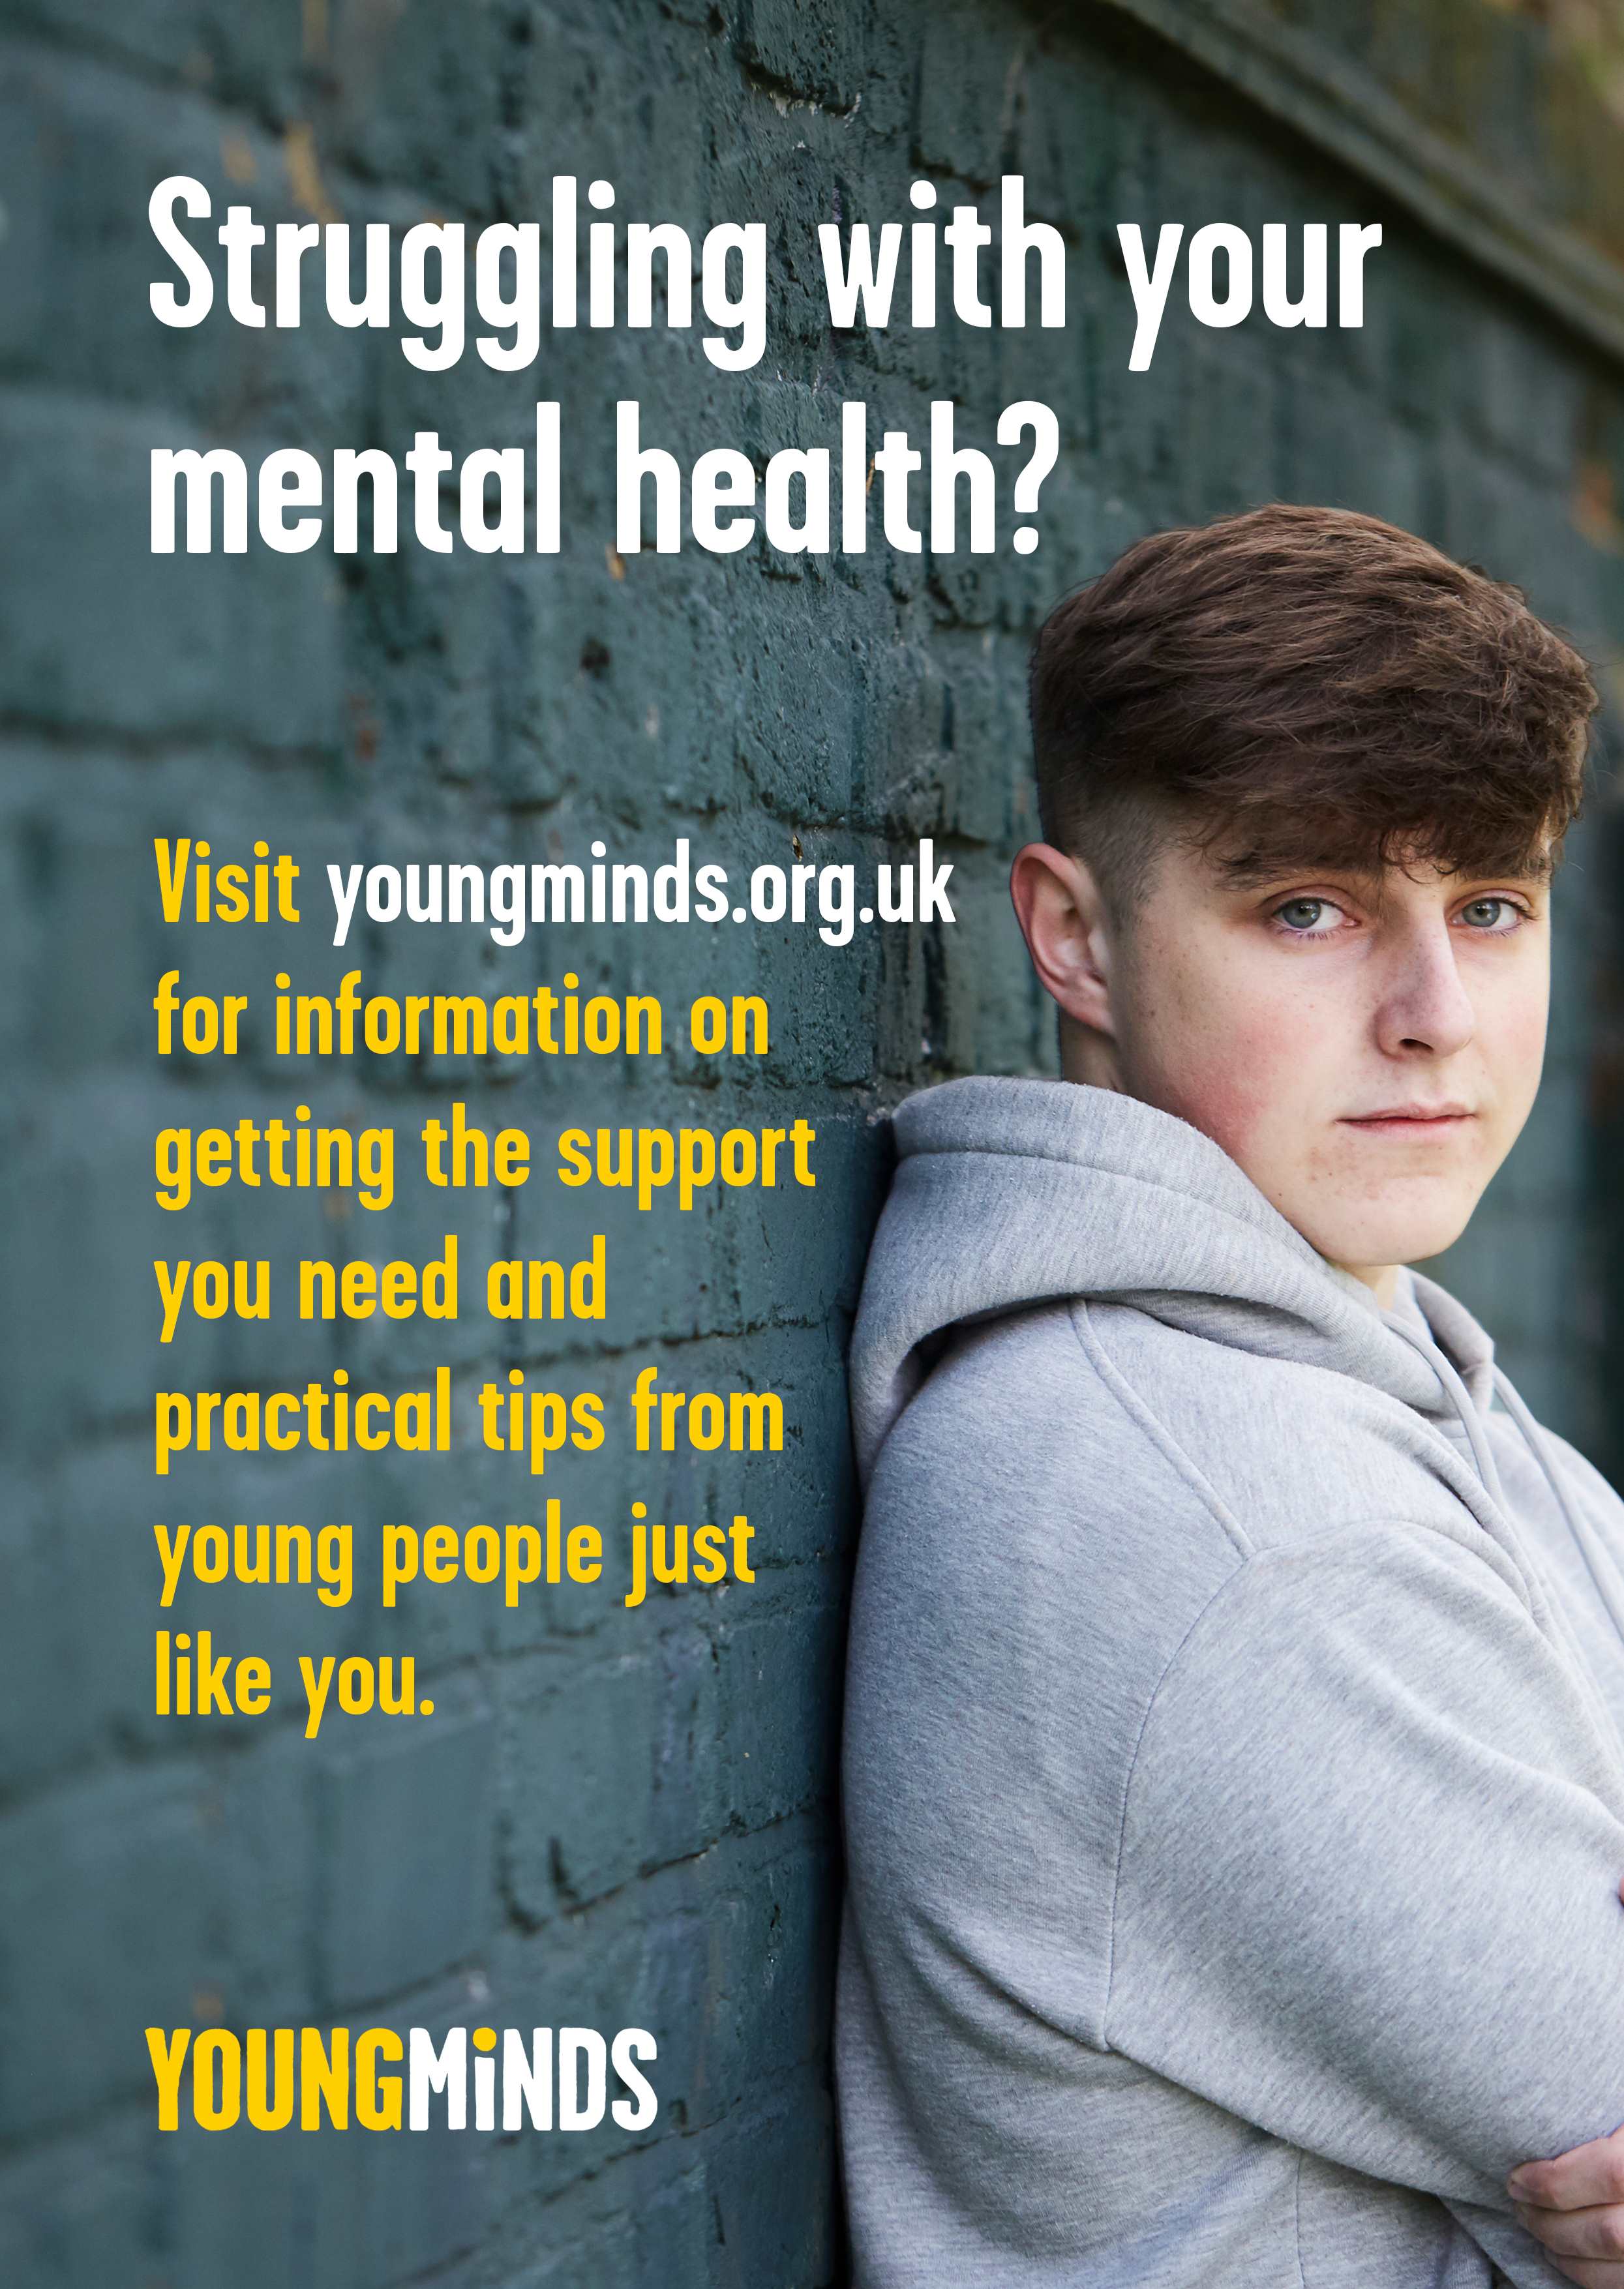 A preview of the poster reading 'Struggling with your mental health?'